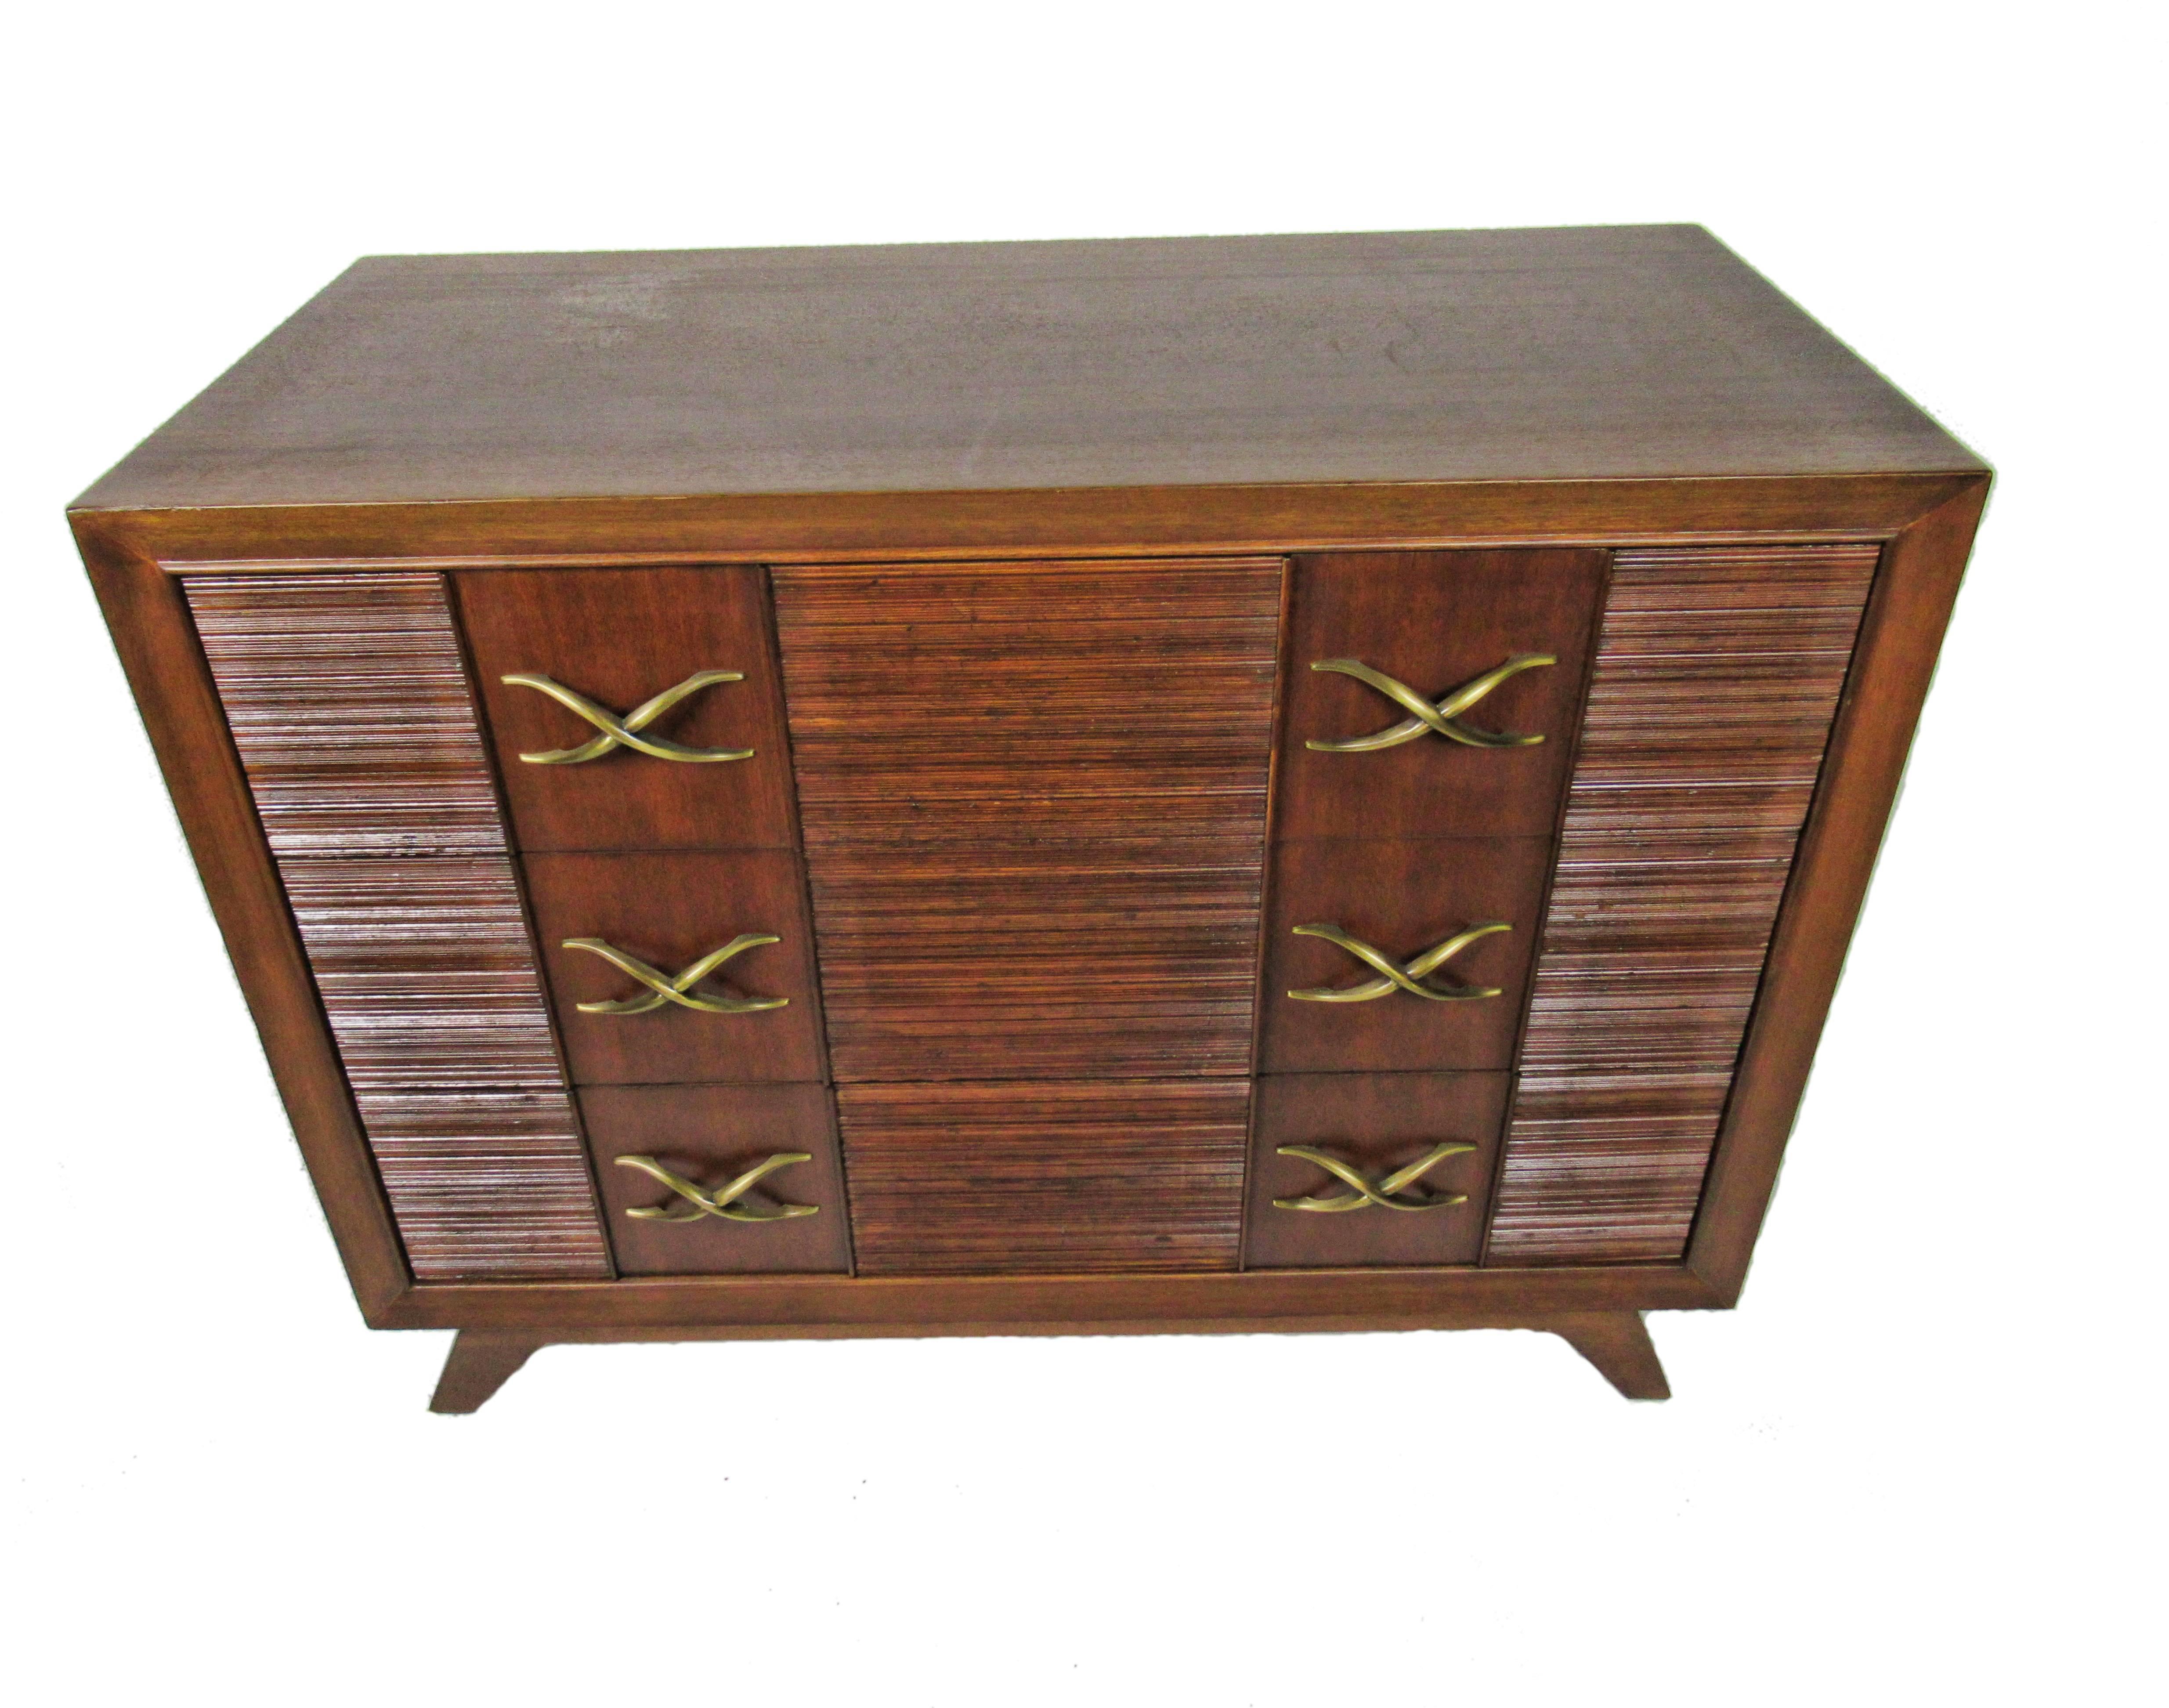 The rectangular top above three drawers with reeded and ribbed fronts with flat panels, the brass pulls in stylized 